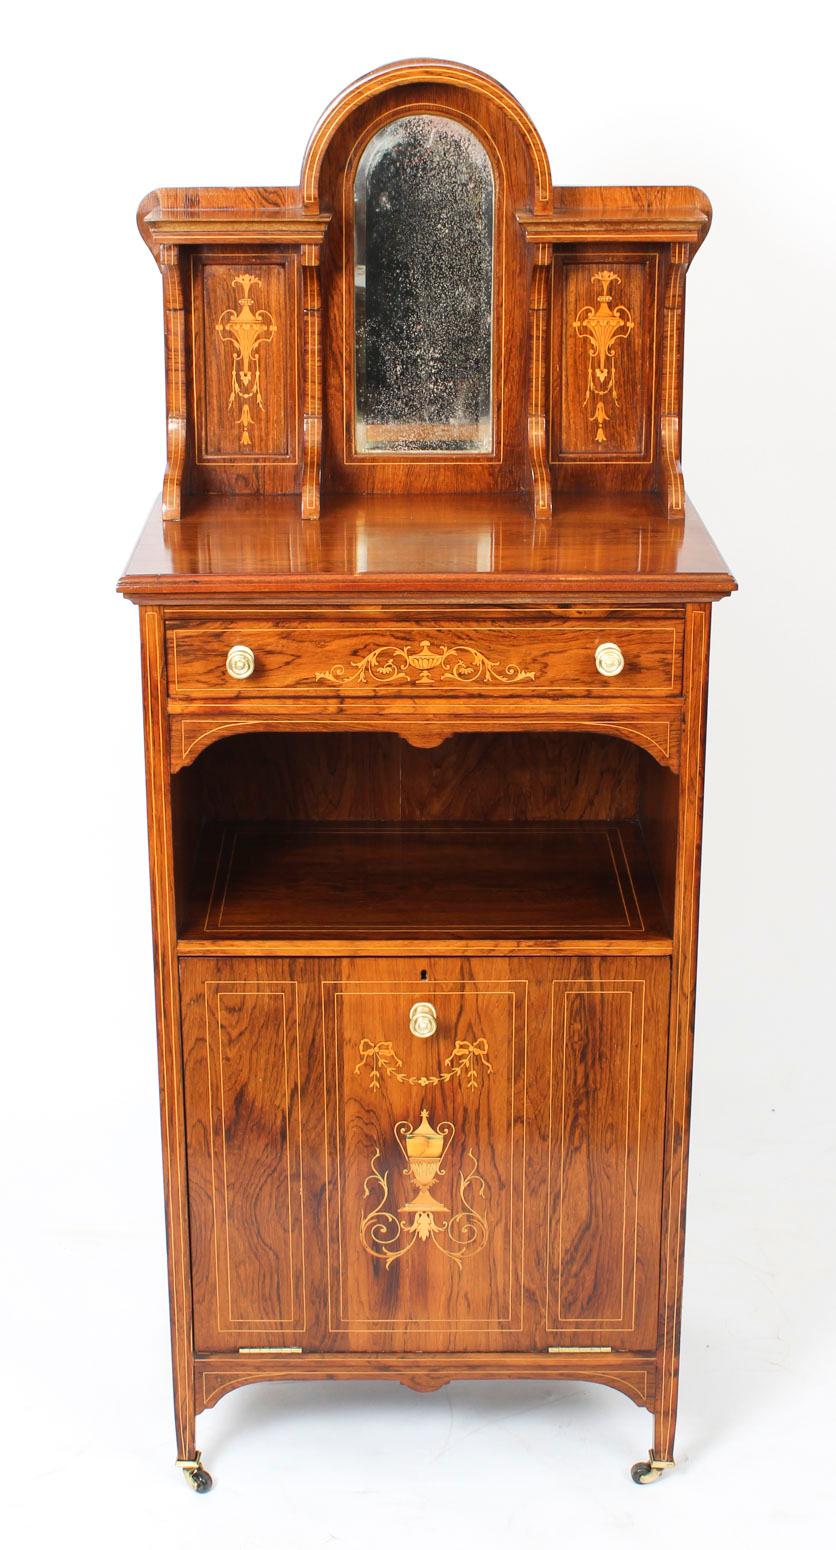 This is a beautiful antique Gonçalo alves and boxwood marquetry inlaid music cabinet, circa 1880 in date. 

The rectangular top has a mirrored marquetry gallery, above a single frieze drawer. The panelled cupboard door slides outwards and has